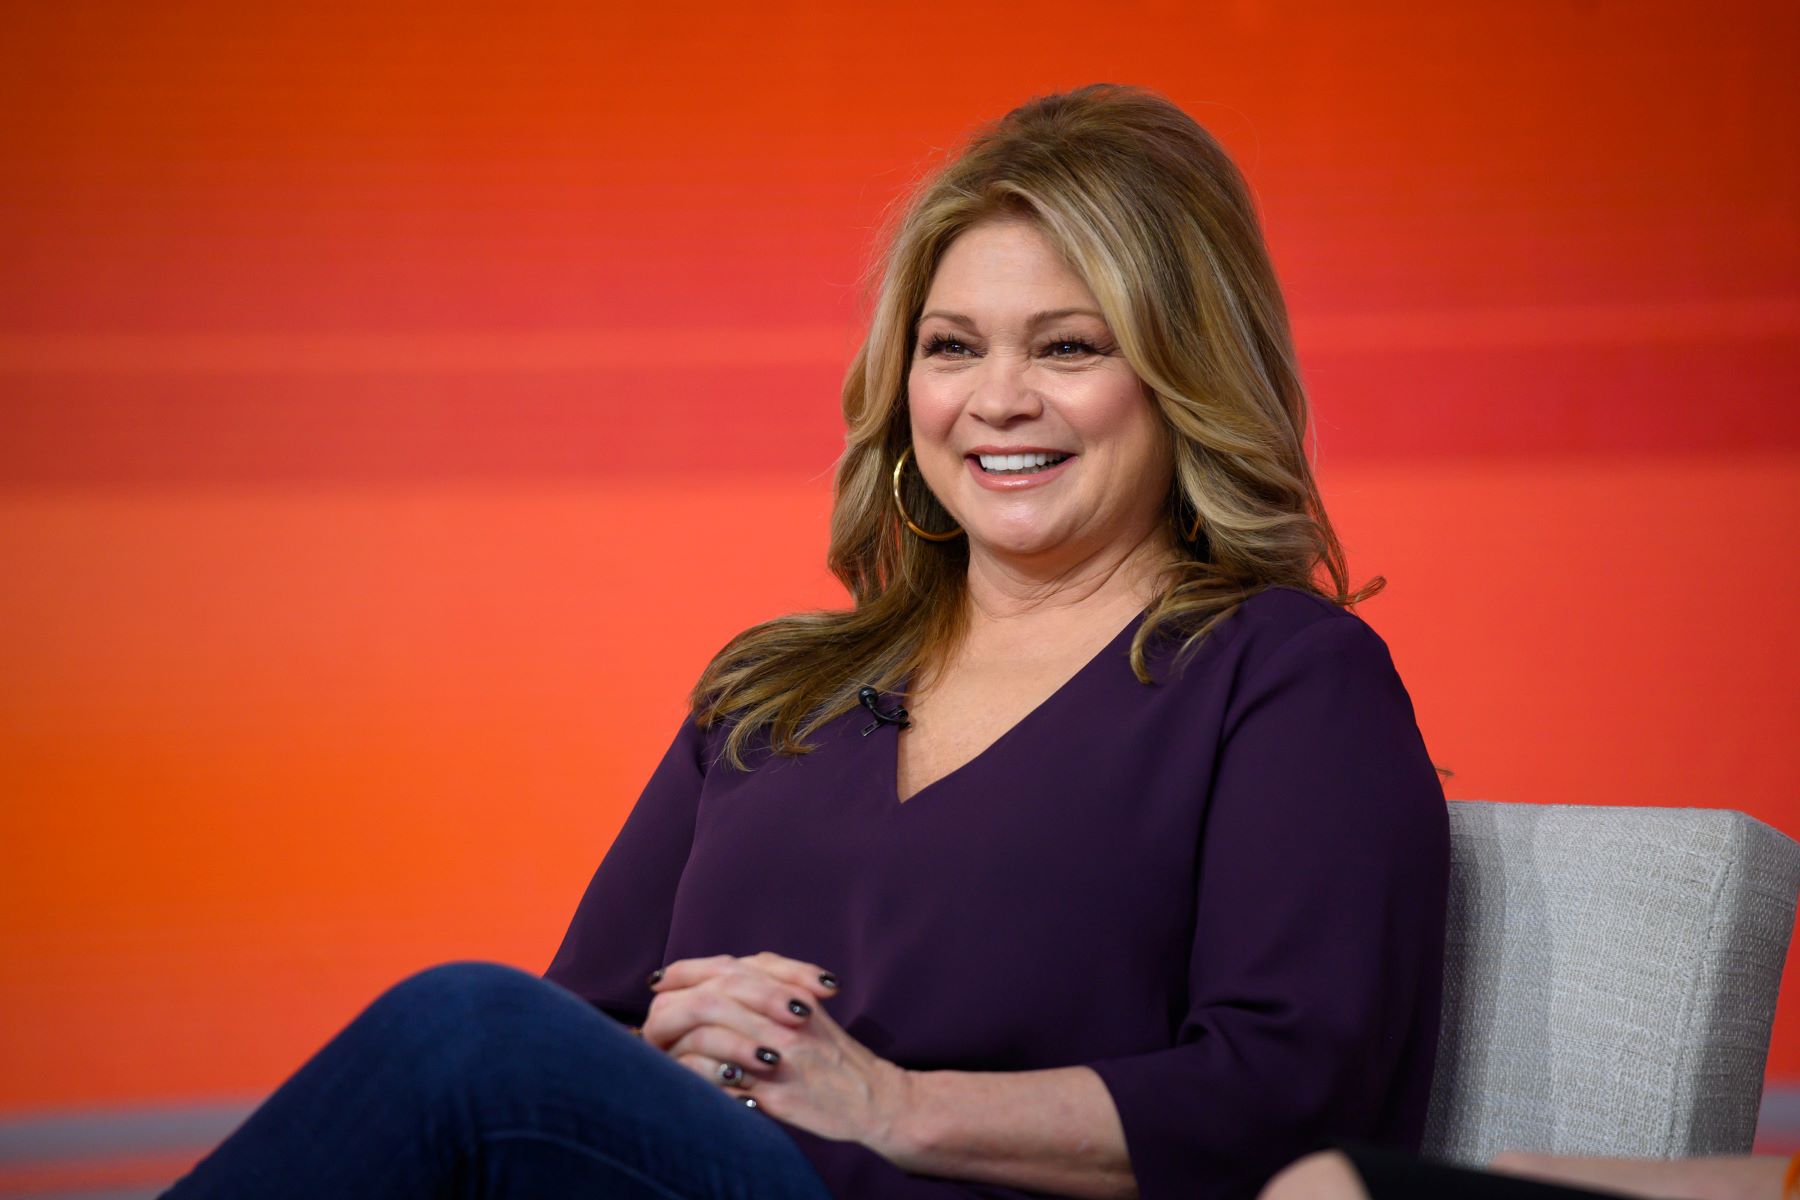 Chef Valerie Bertinelli on Season 69 of 'The Today Show' in January 2020